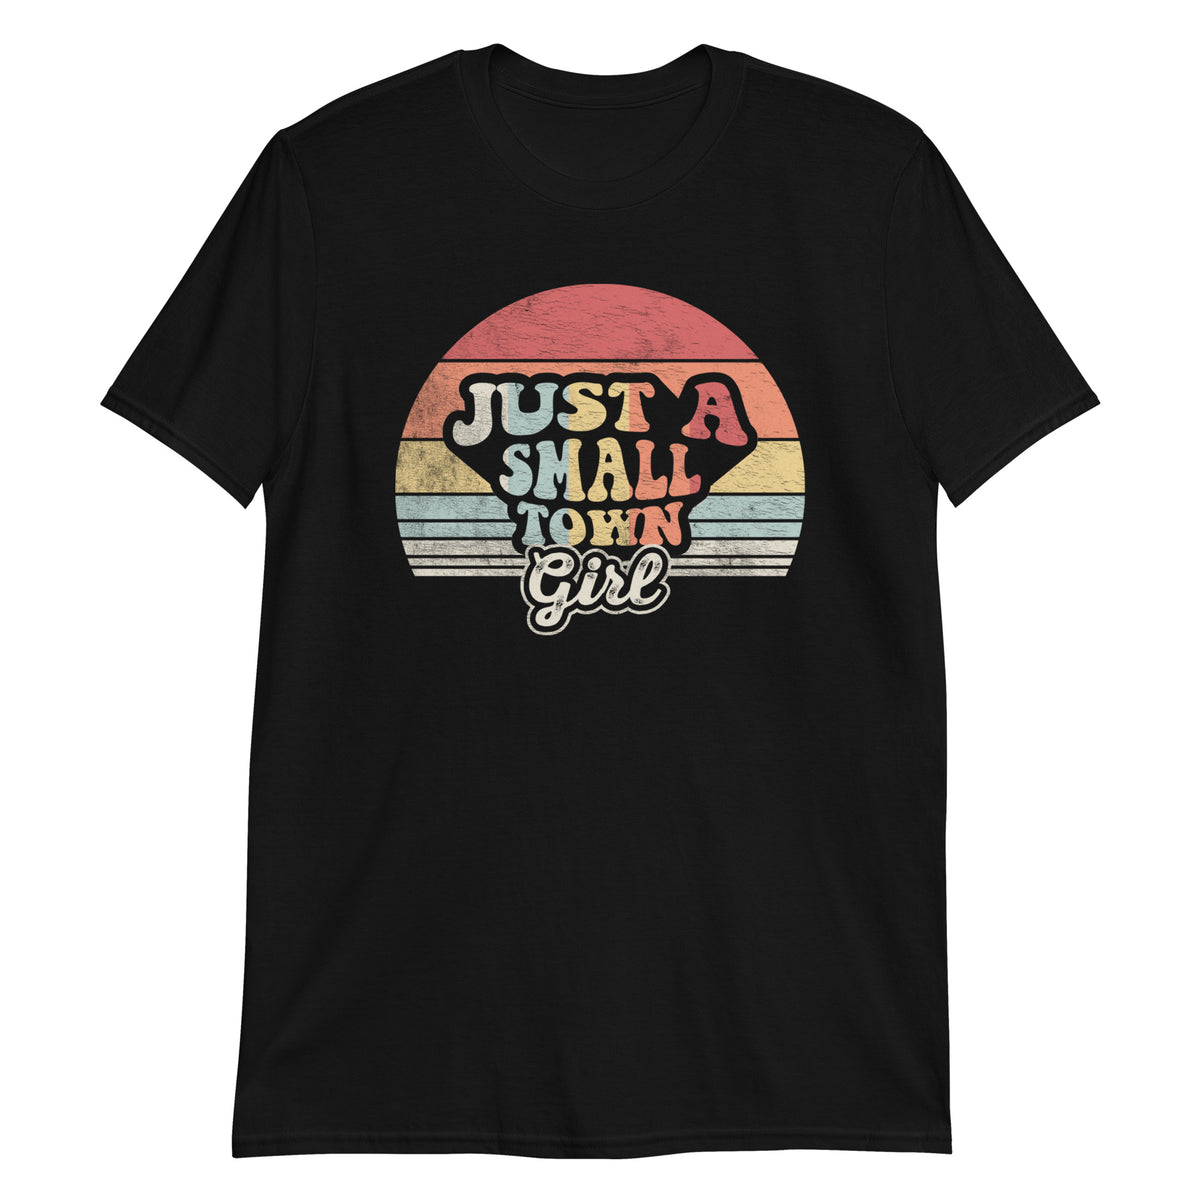 Just A Small Town Girl Vintage Retro Gift For Womens T-Shirt